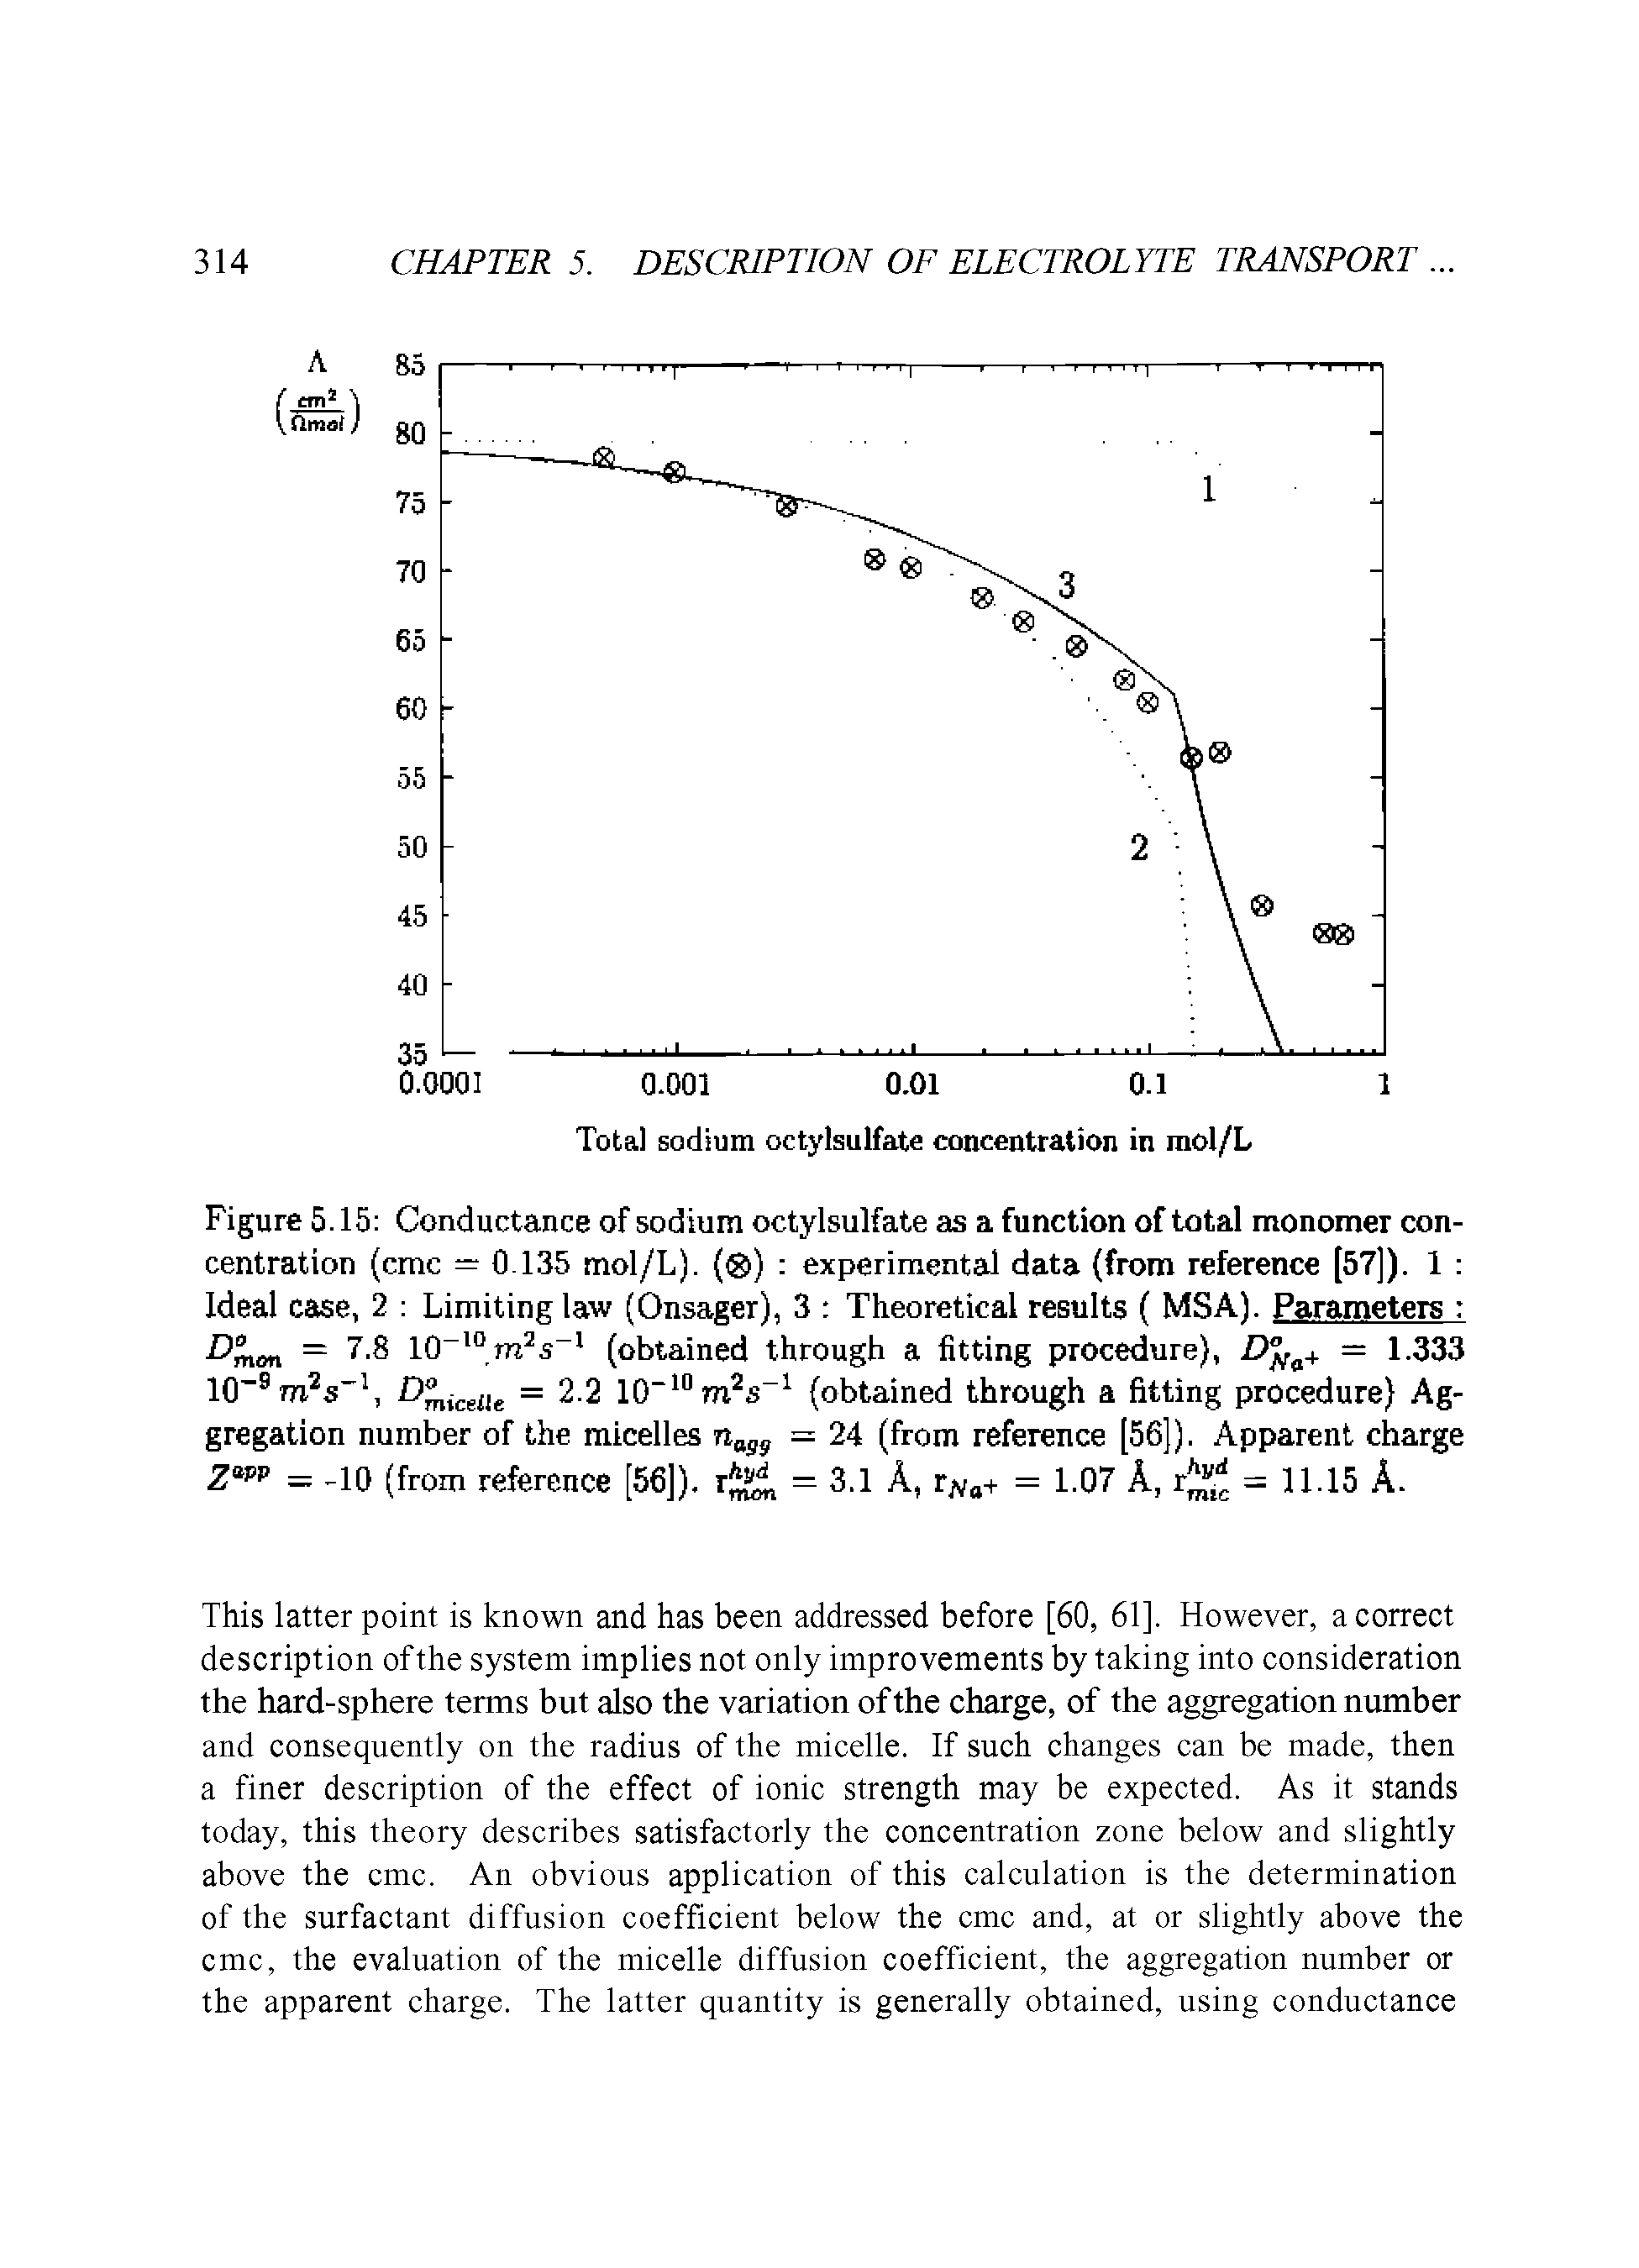 Figure 5.15 Conductance of sodium octylsulfate as a function of total monomer concentration (cmc — 0.135 mol/L). ( ) experimental data (from reference [57]). 1 Ideal case, 2 Limiting law (Onsager), 3 Theoretical results ( MSA). Parameters = 7.8 10 m s (obtained through a fitting procedure), = 1.333...